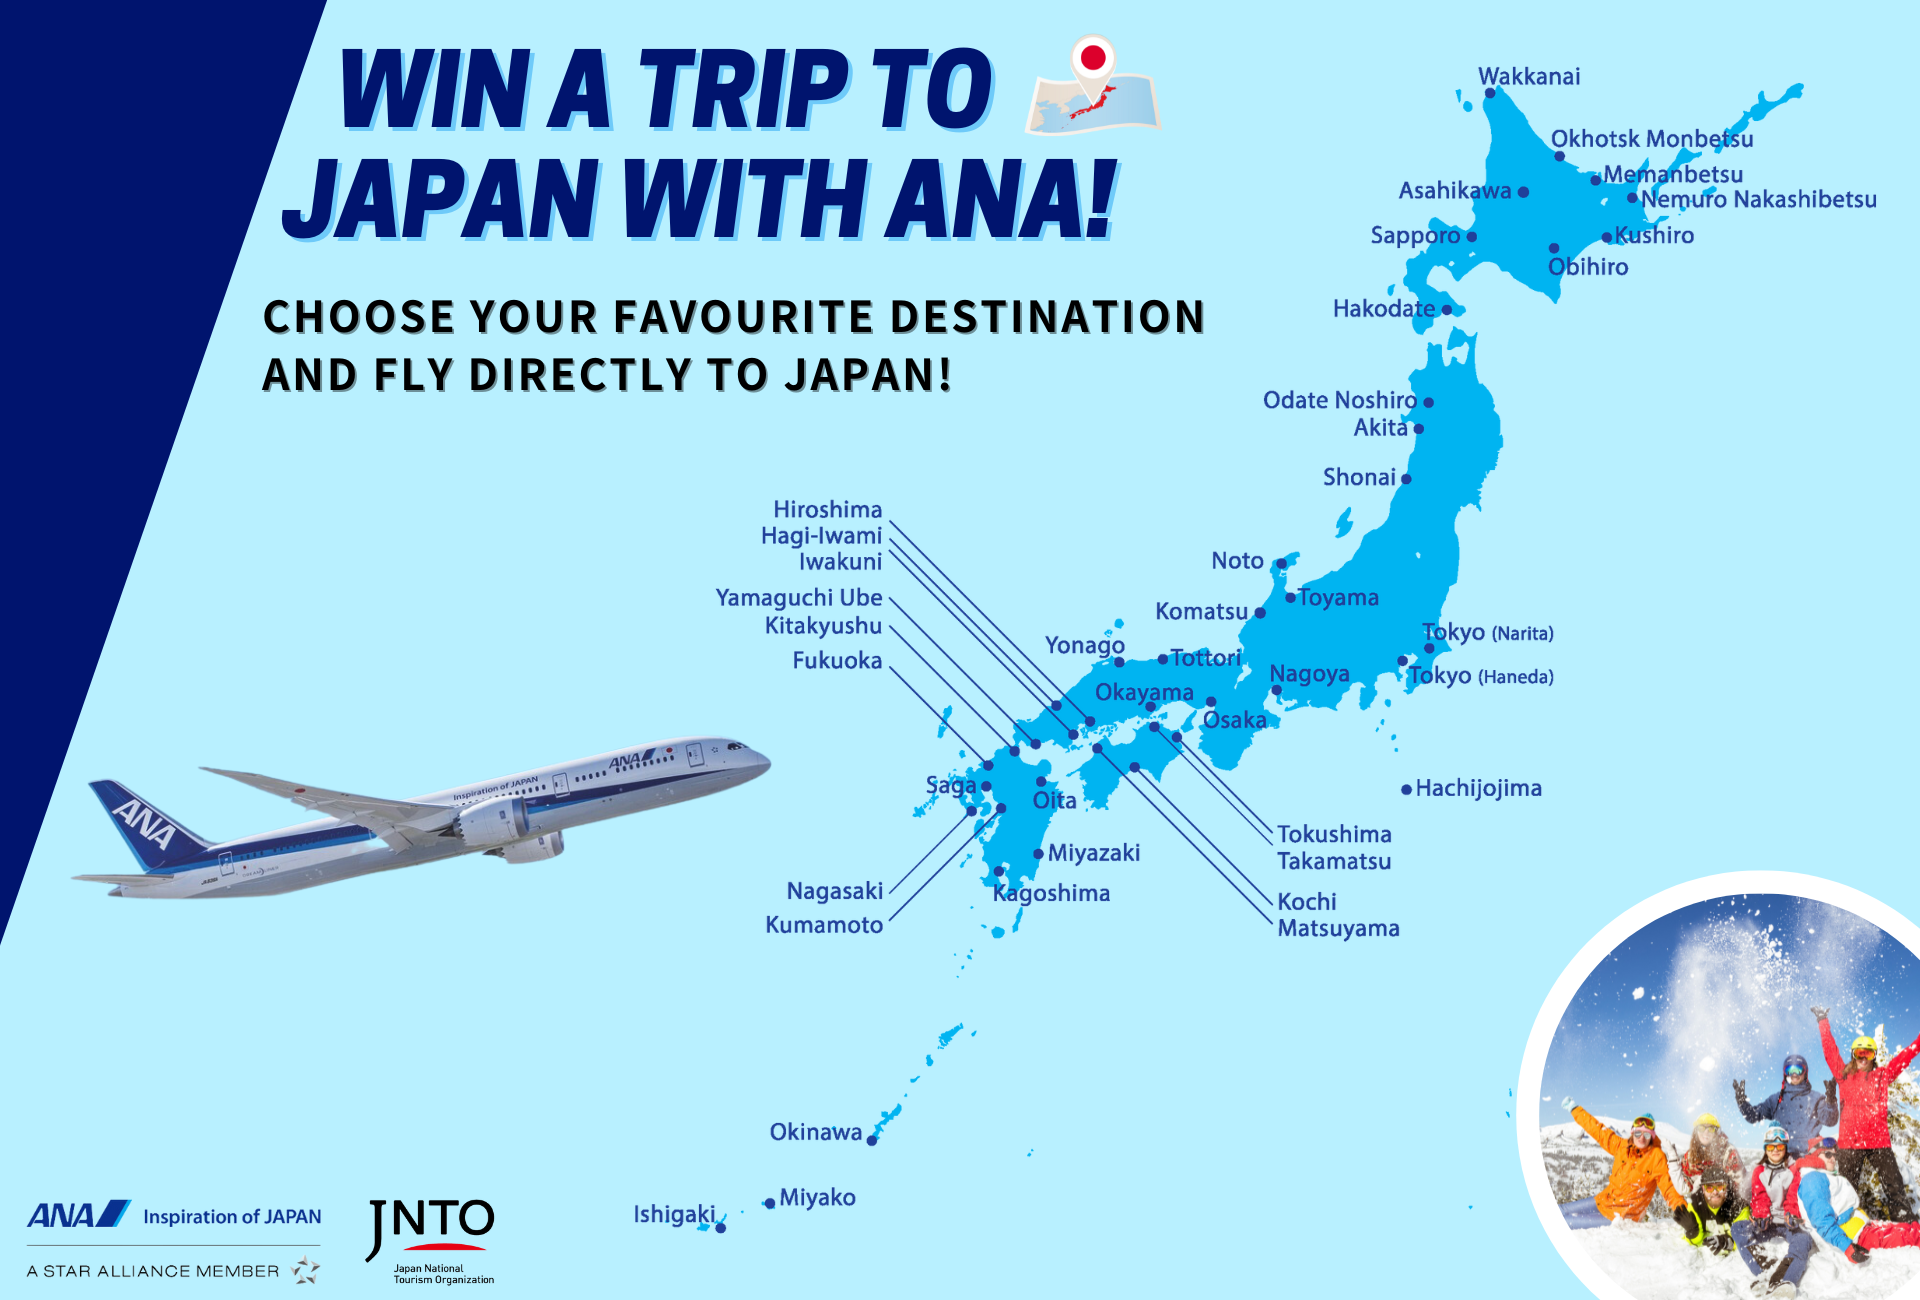 Flights to Tokyo:Fly to Japan with 5-Star Airline - ANA English